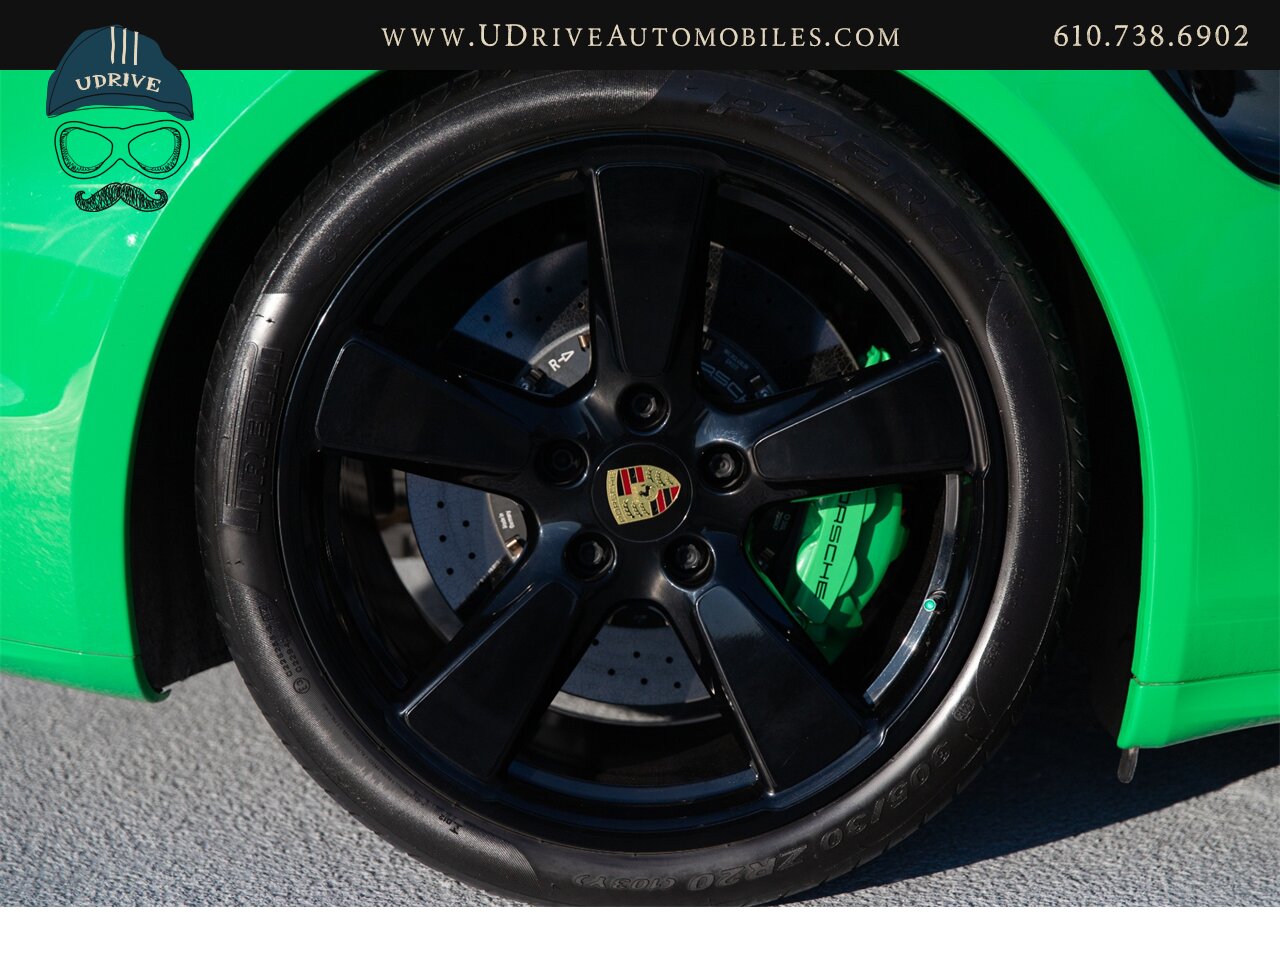 2016 Porsche 911 Turbo S PTS Viper Green Aerokit $203k MSRP  Painted Side Skirts Painted Grilles Wheels in Black - Photo 48 - West Chester, PA 19382